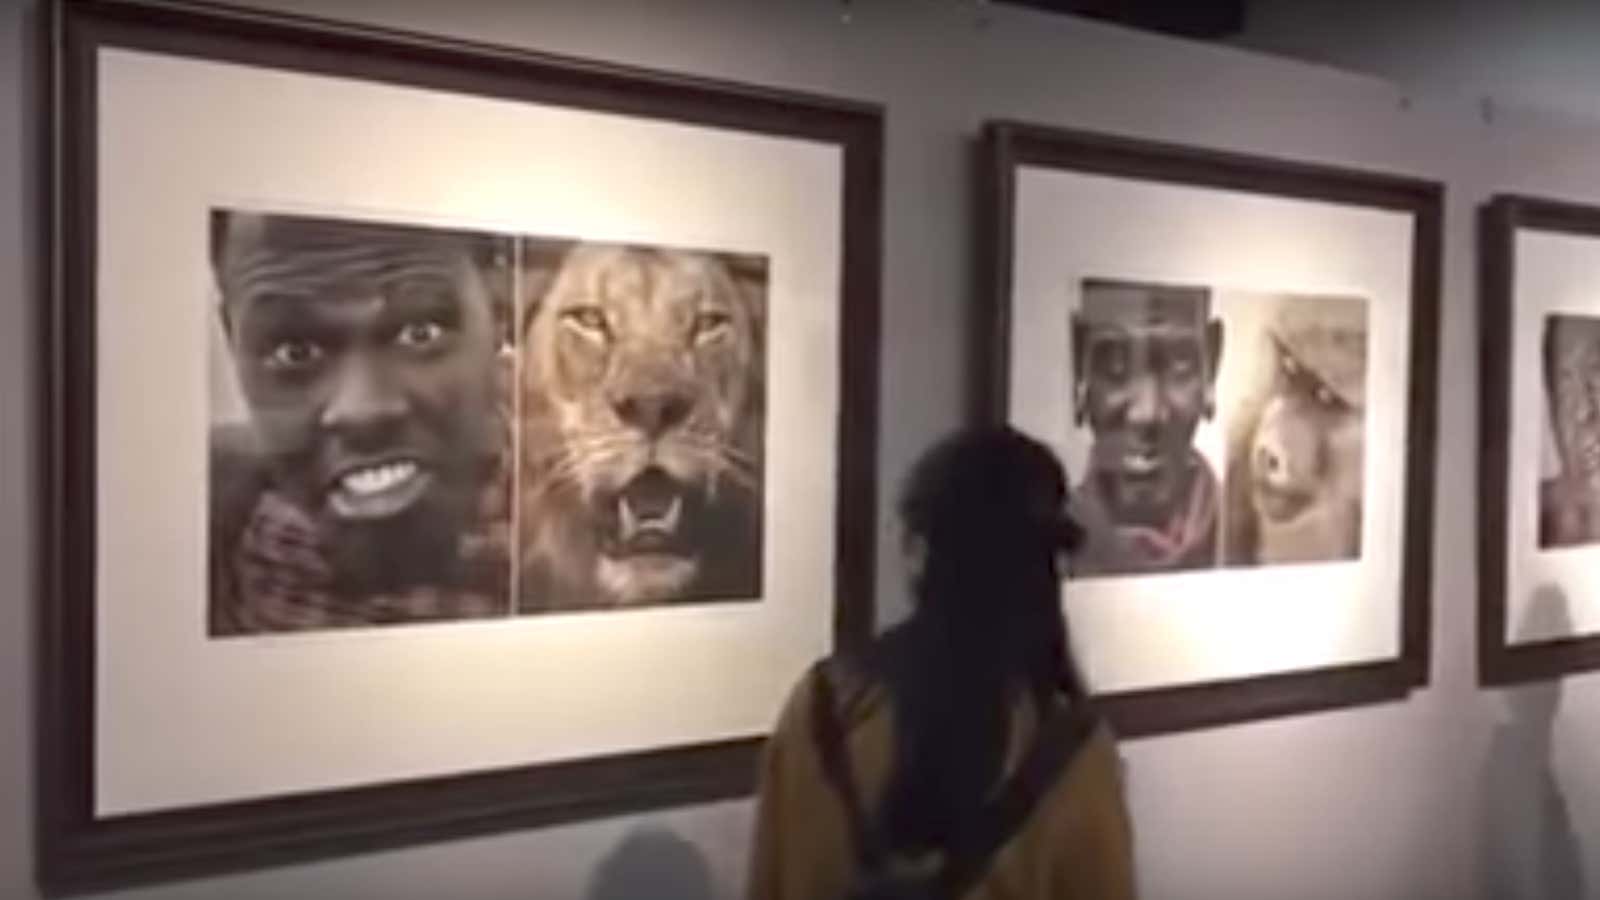 The portraits of Africans alongside animals.